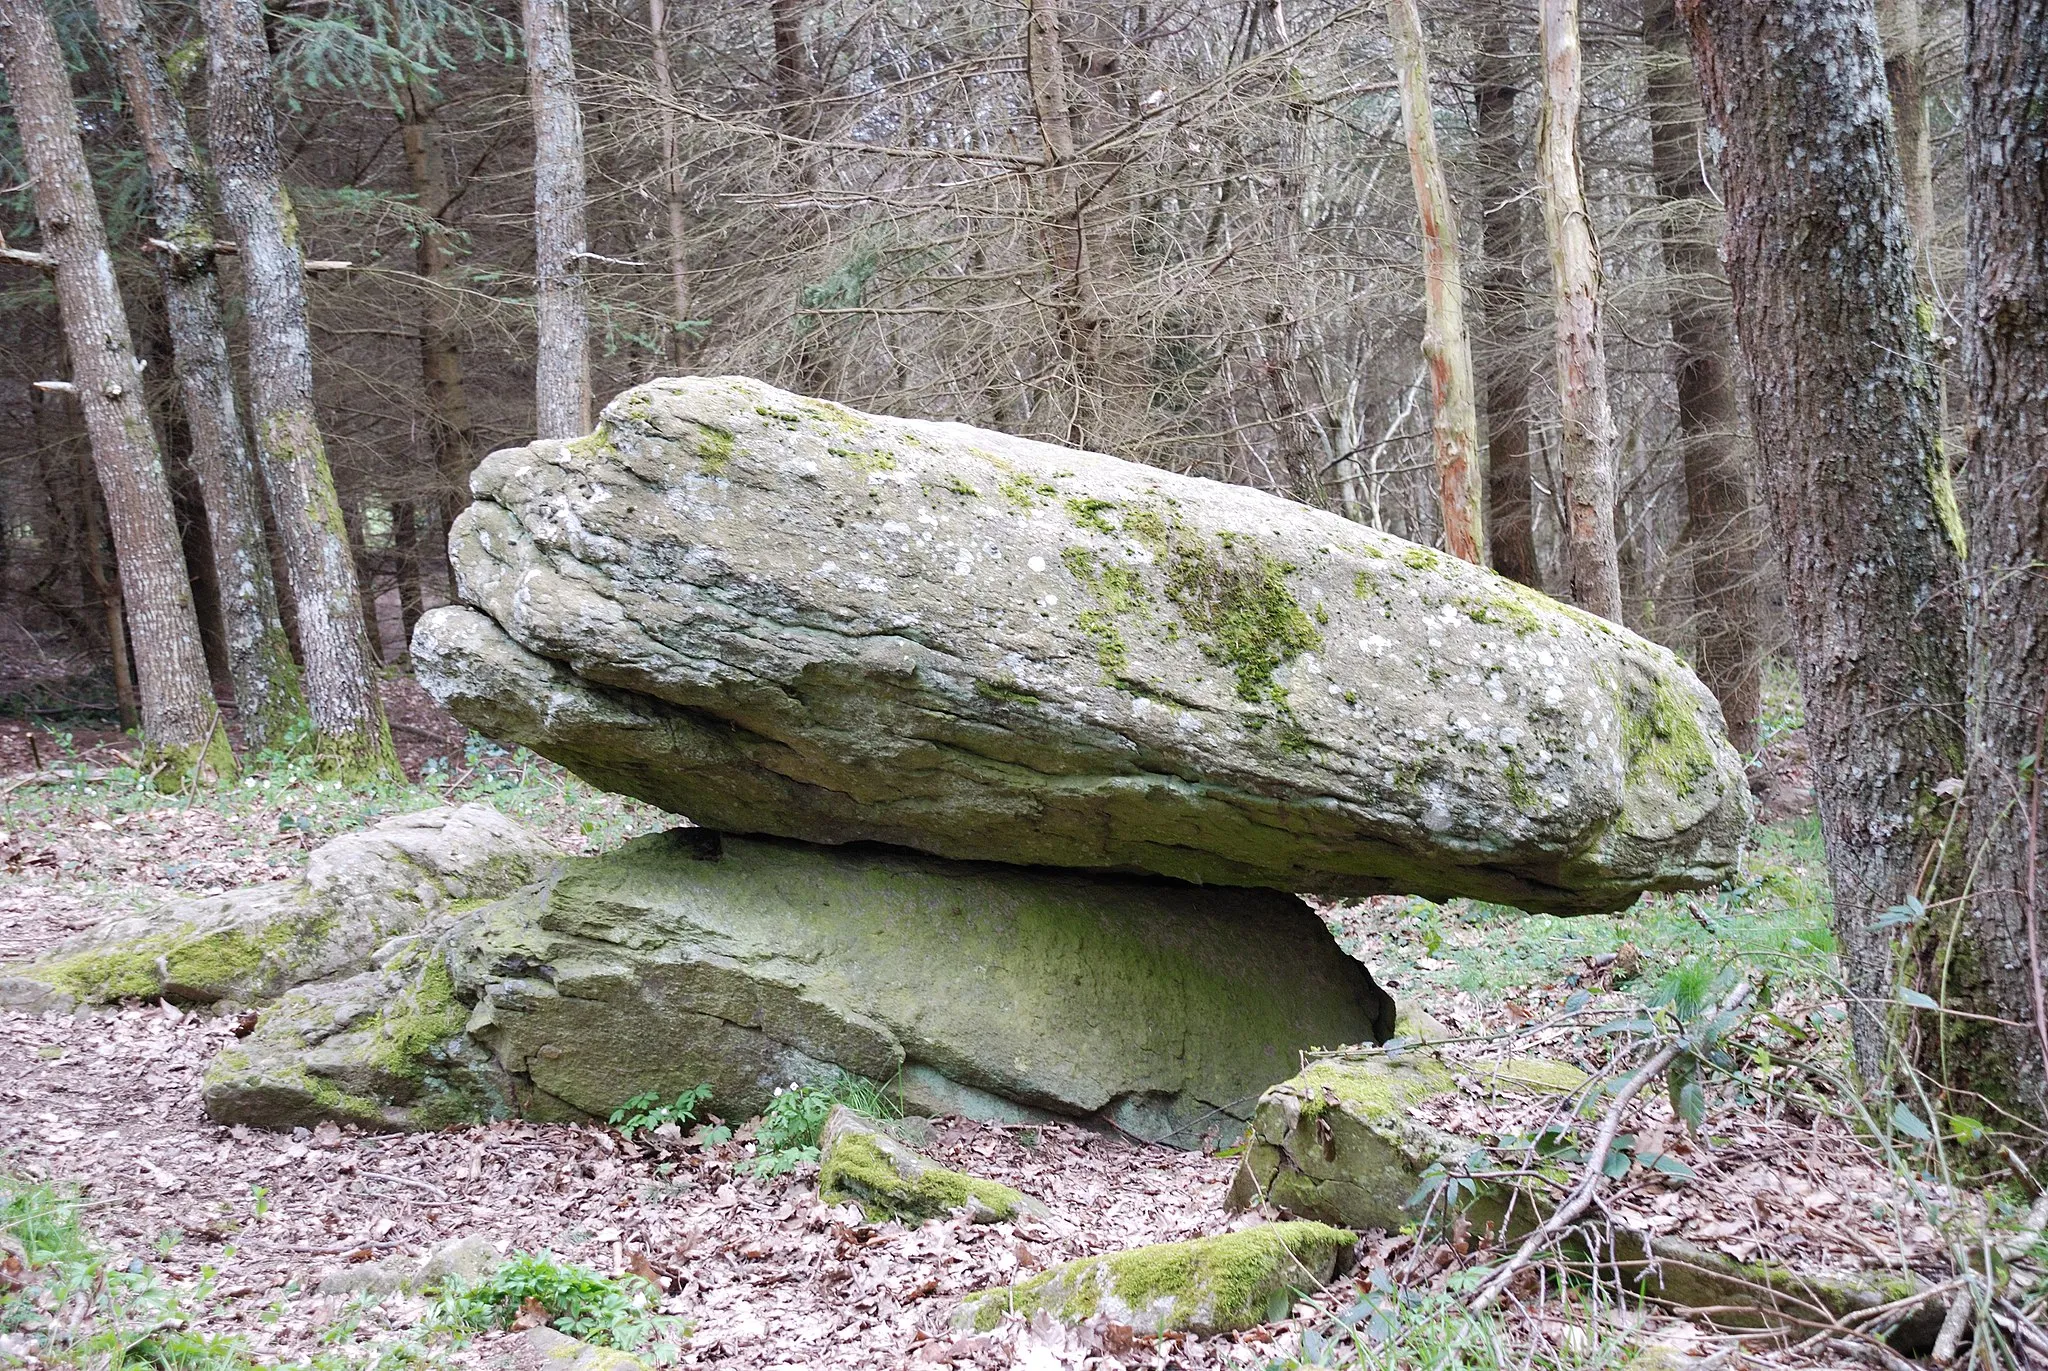 Photo showing: The "Pierre branlante (shaky stone) near the small hamlet of Ballages(commune of Combronde, Puy-de-Dôme, France, position N 45° 59' 39,9" E 003°03'03,4").